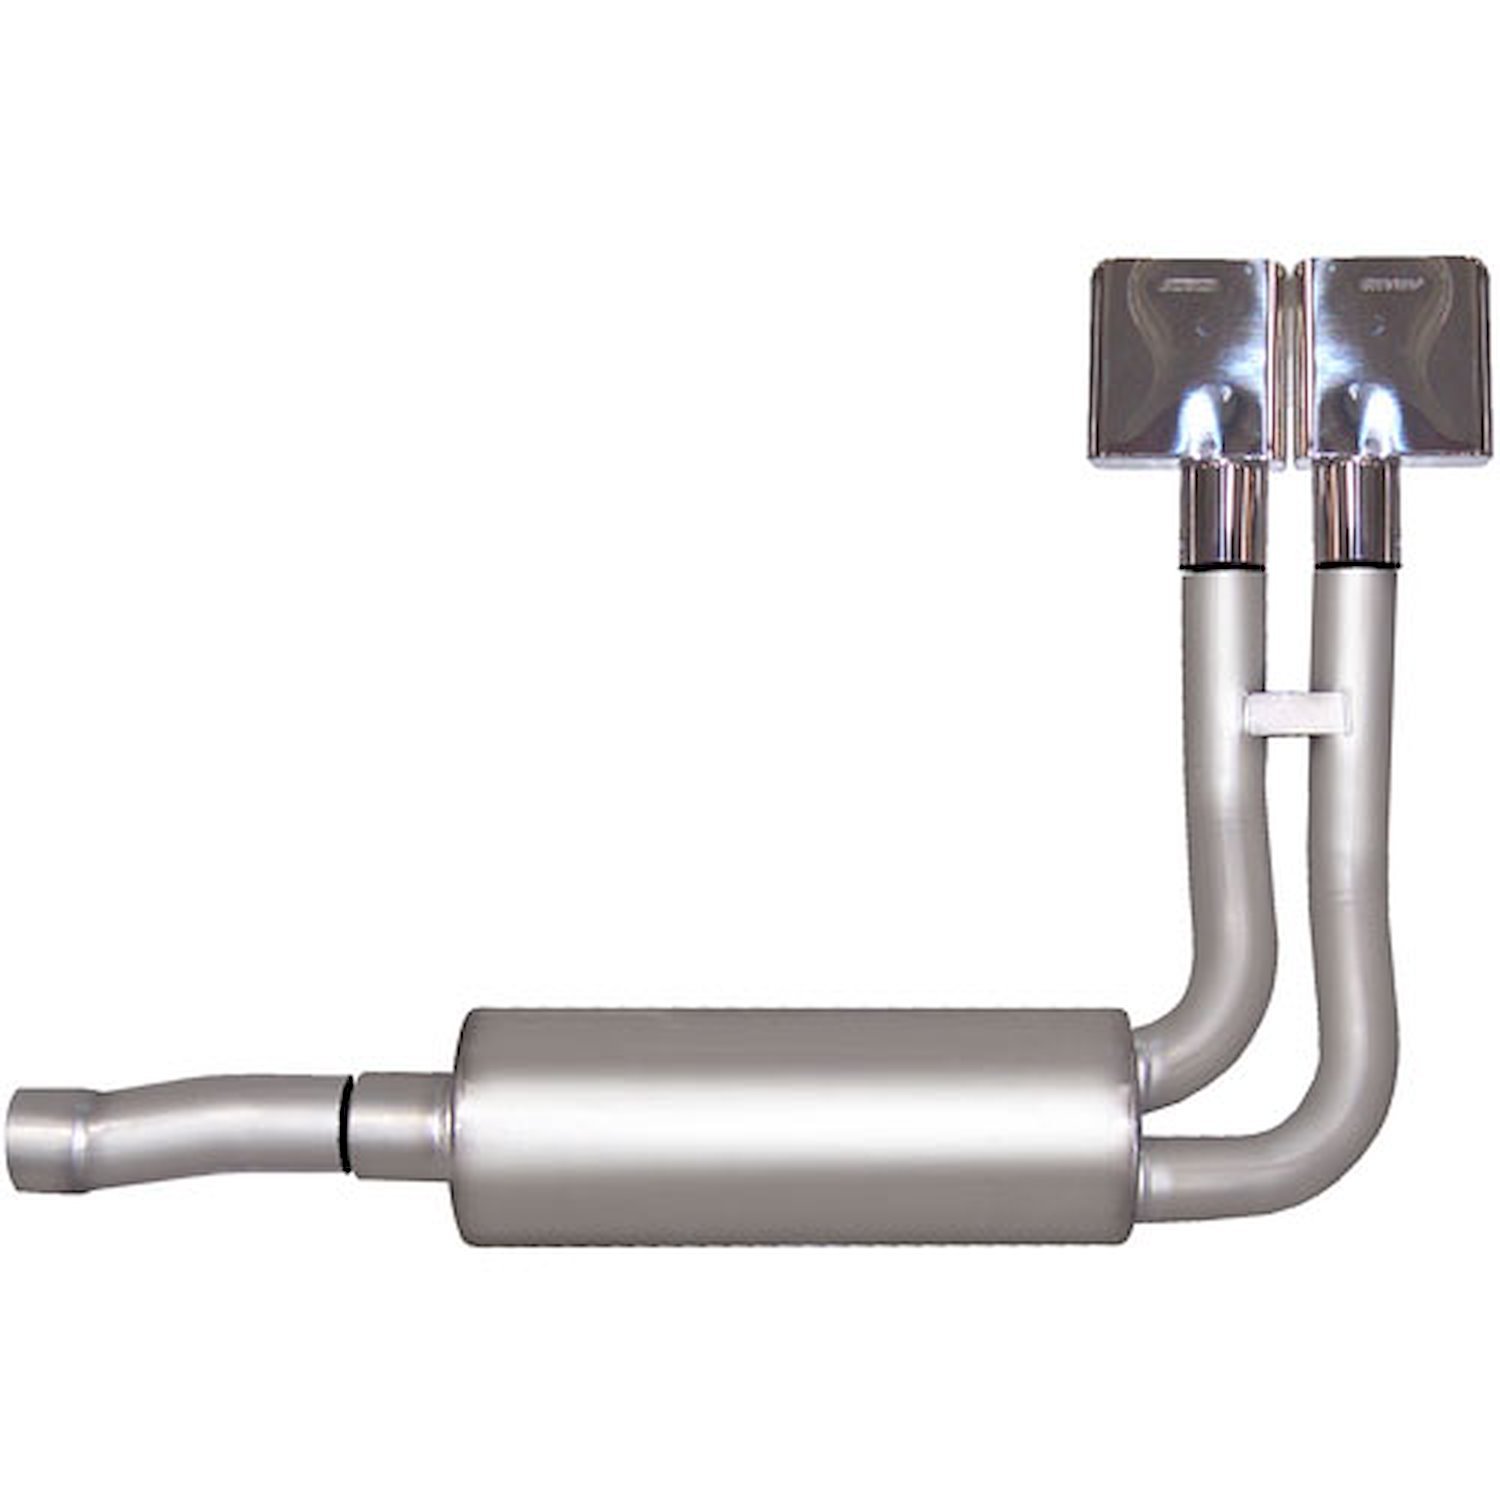 Super Truck Stainless Steel Cat-Back Exhaust 1988-93 GM C/K Series 1500/2500 Truck 5.7L